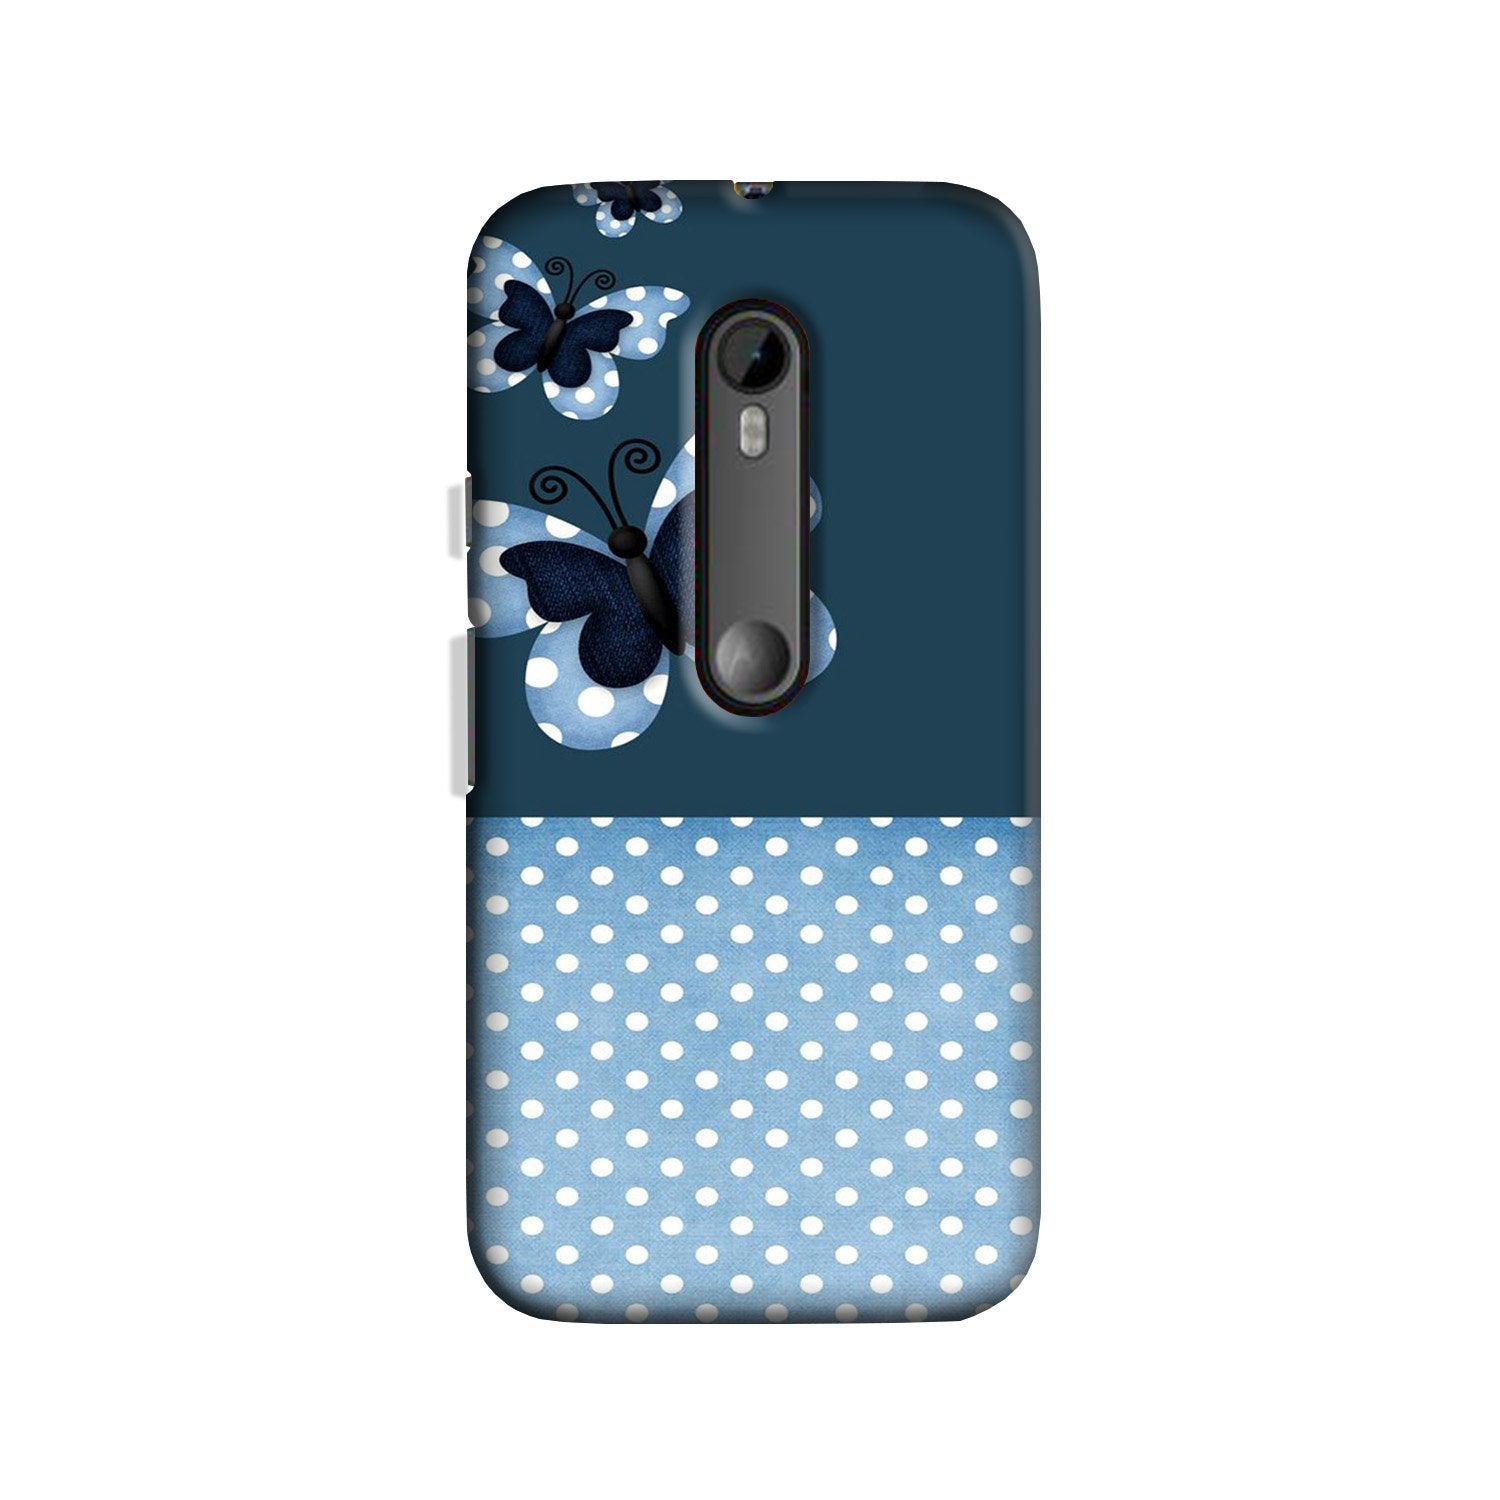 White dots Butterfly Case for Moto X Force